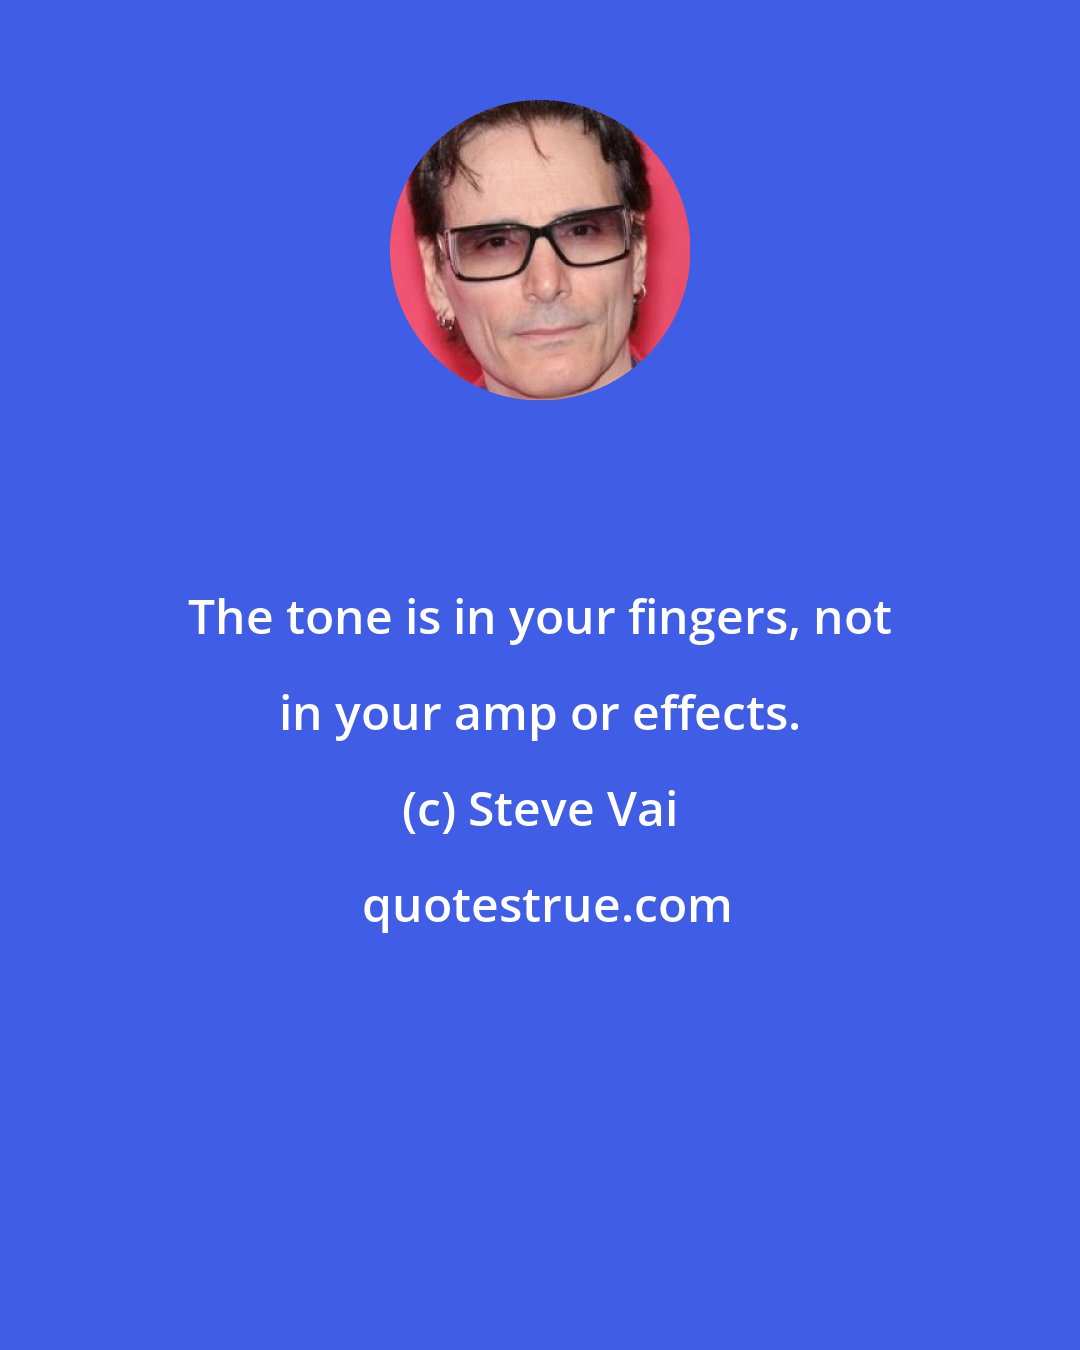 Steve Vai: The tone is in your fingers, not in your amp or effects.